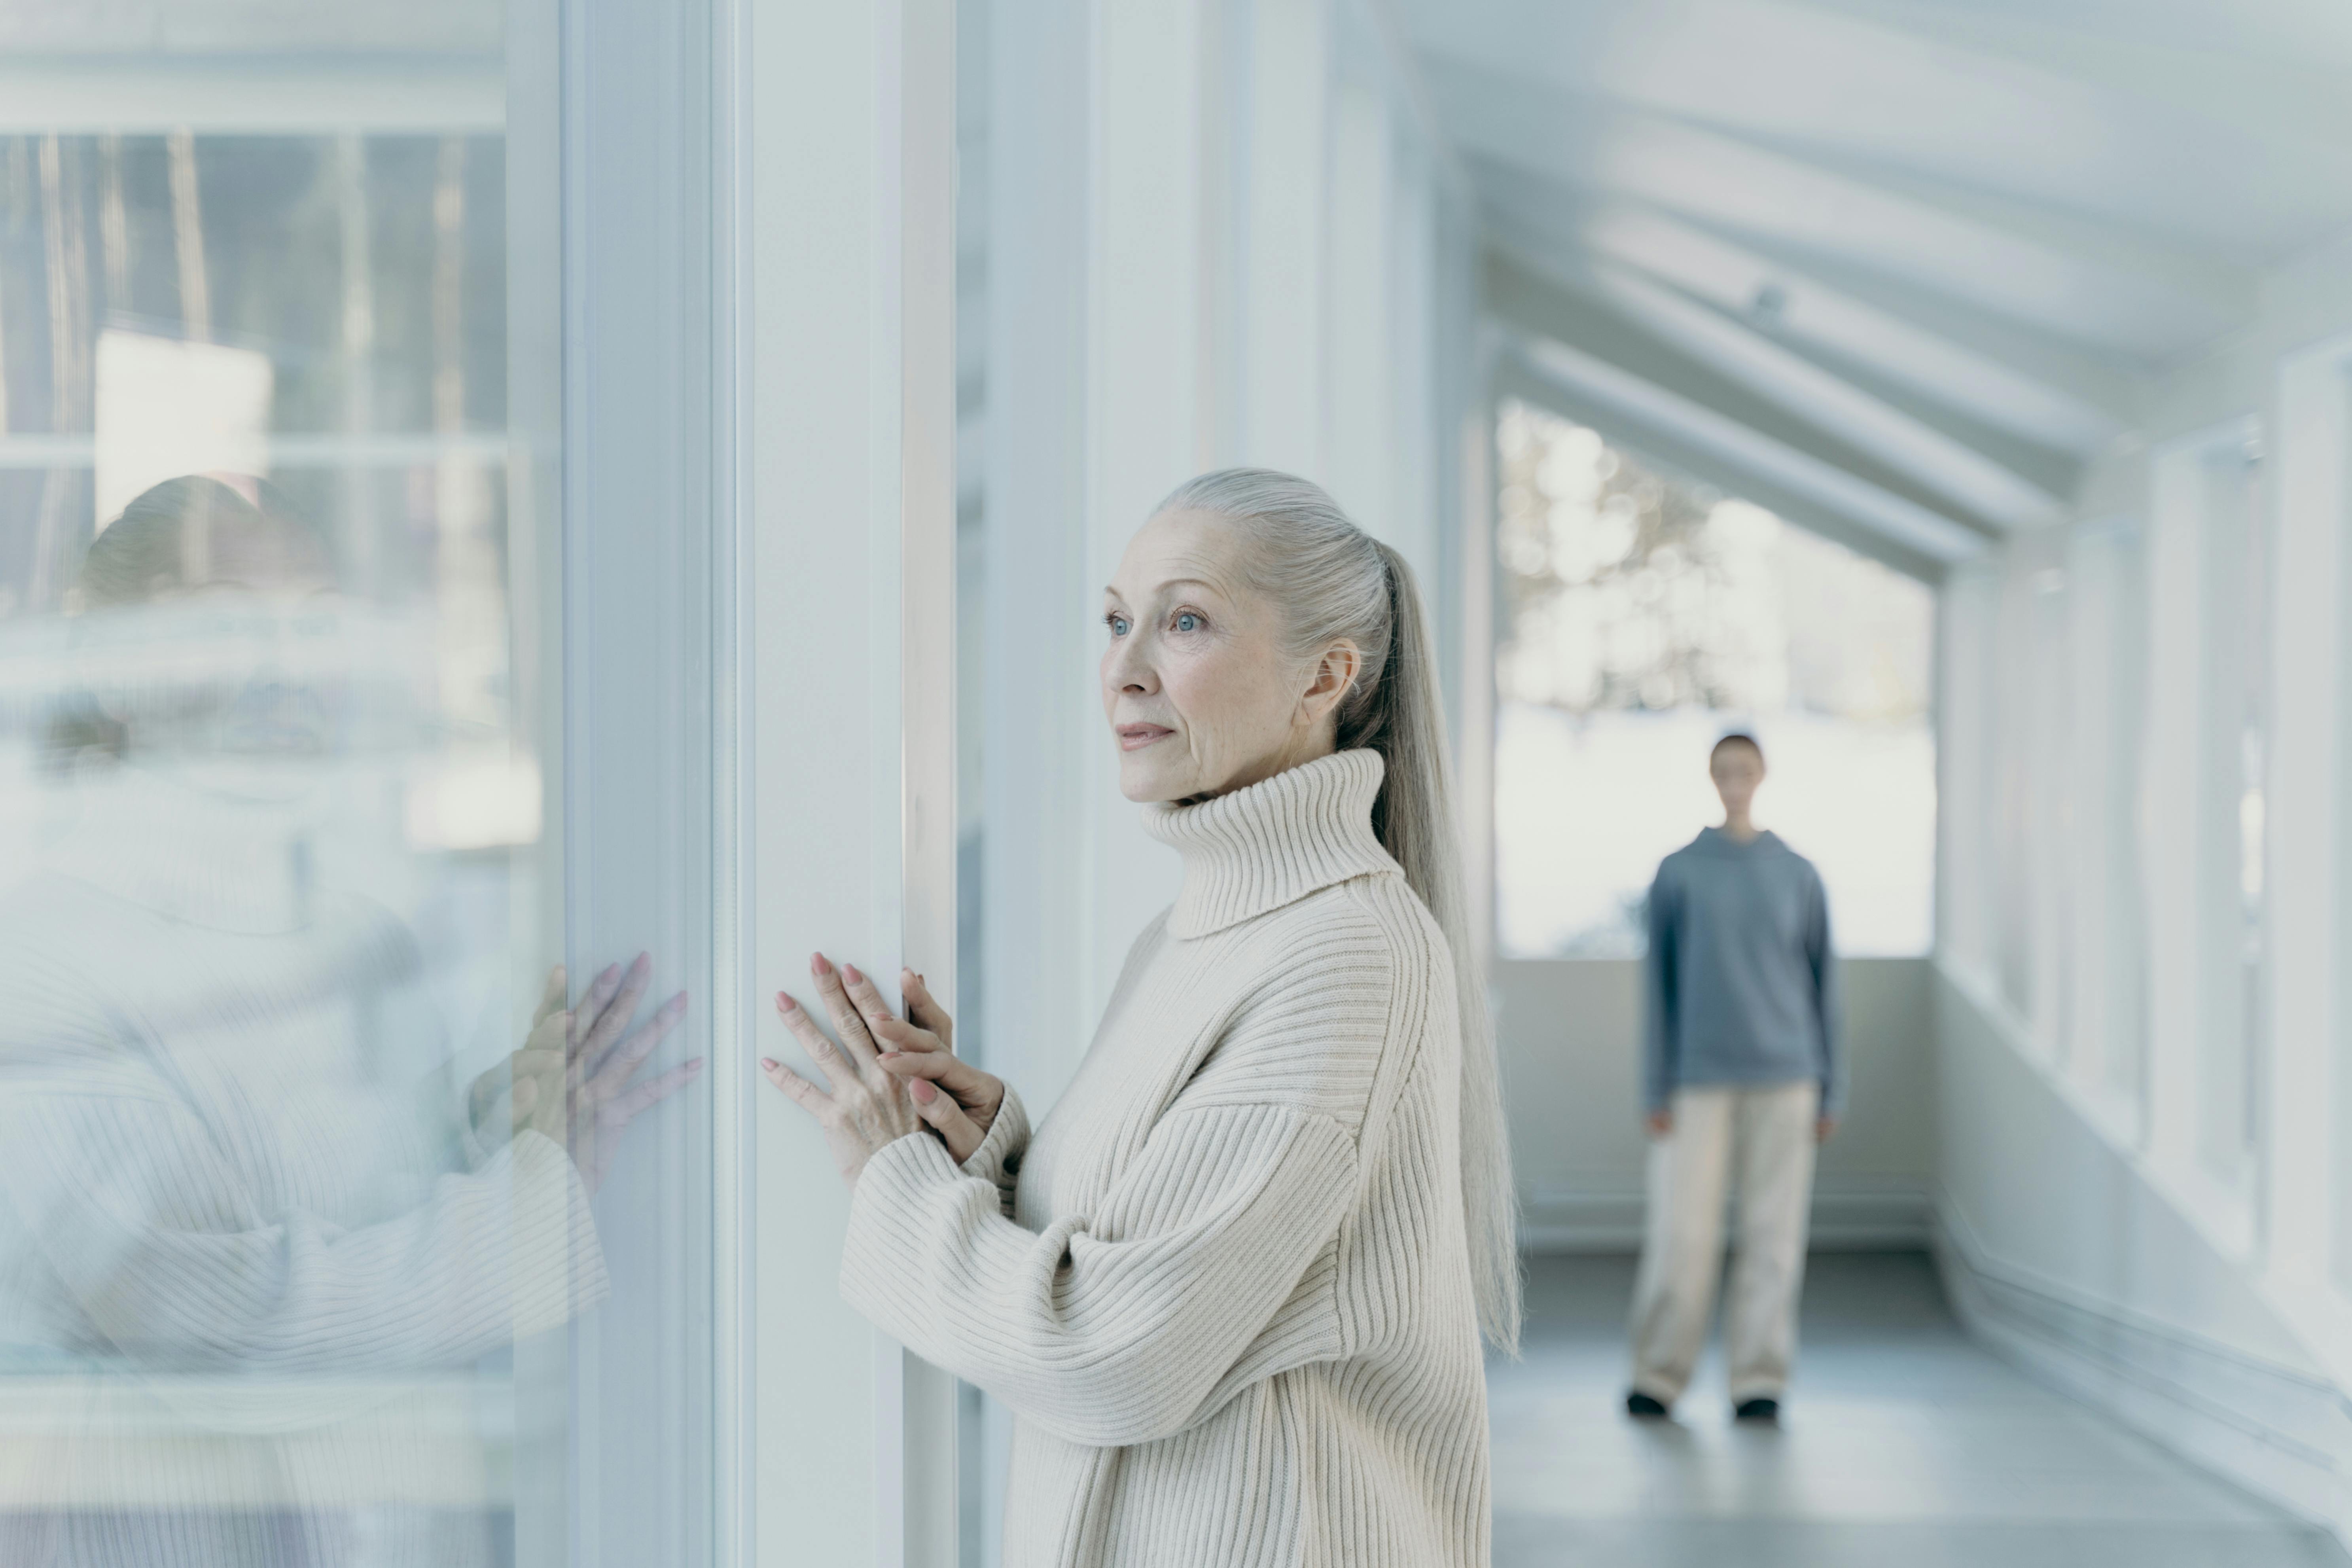 A elderly woman looks through window glass, with a figure in the background | Source: Pexels